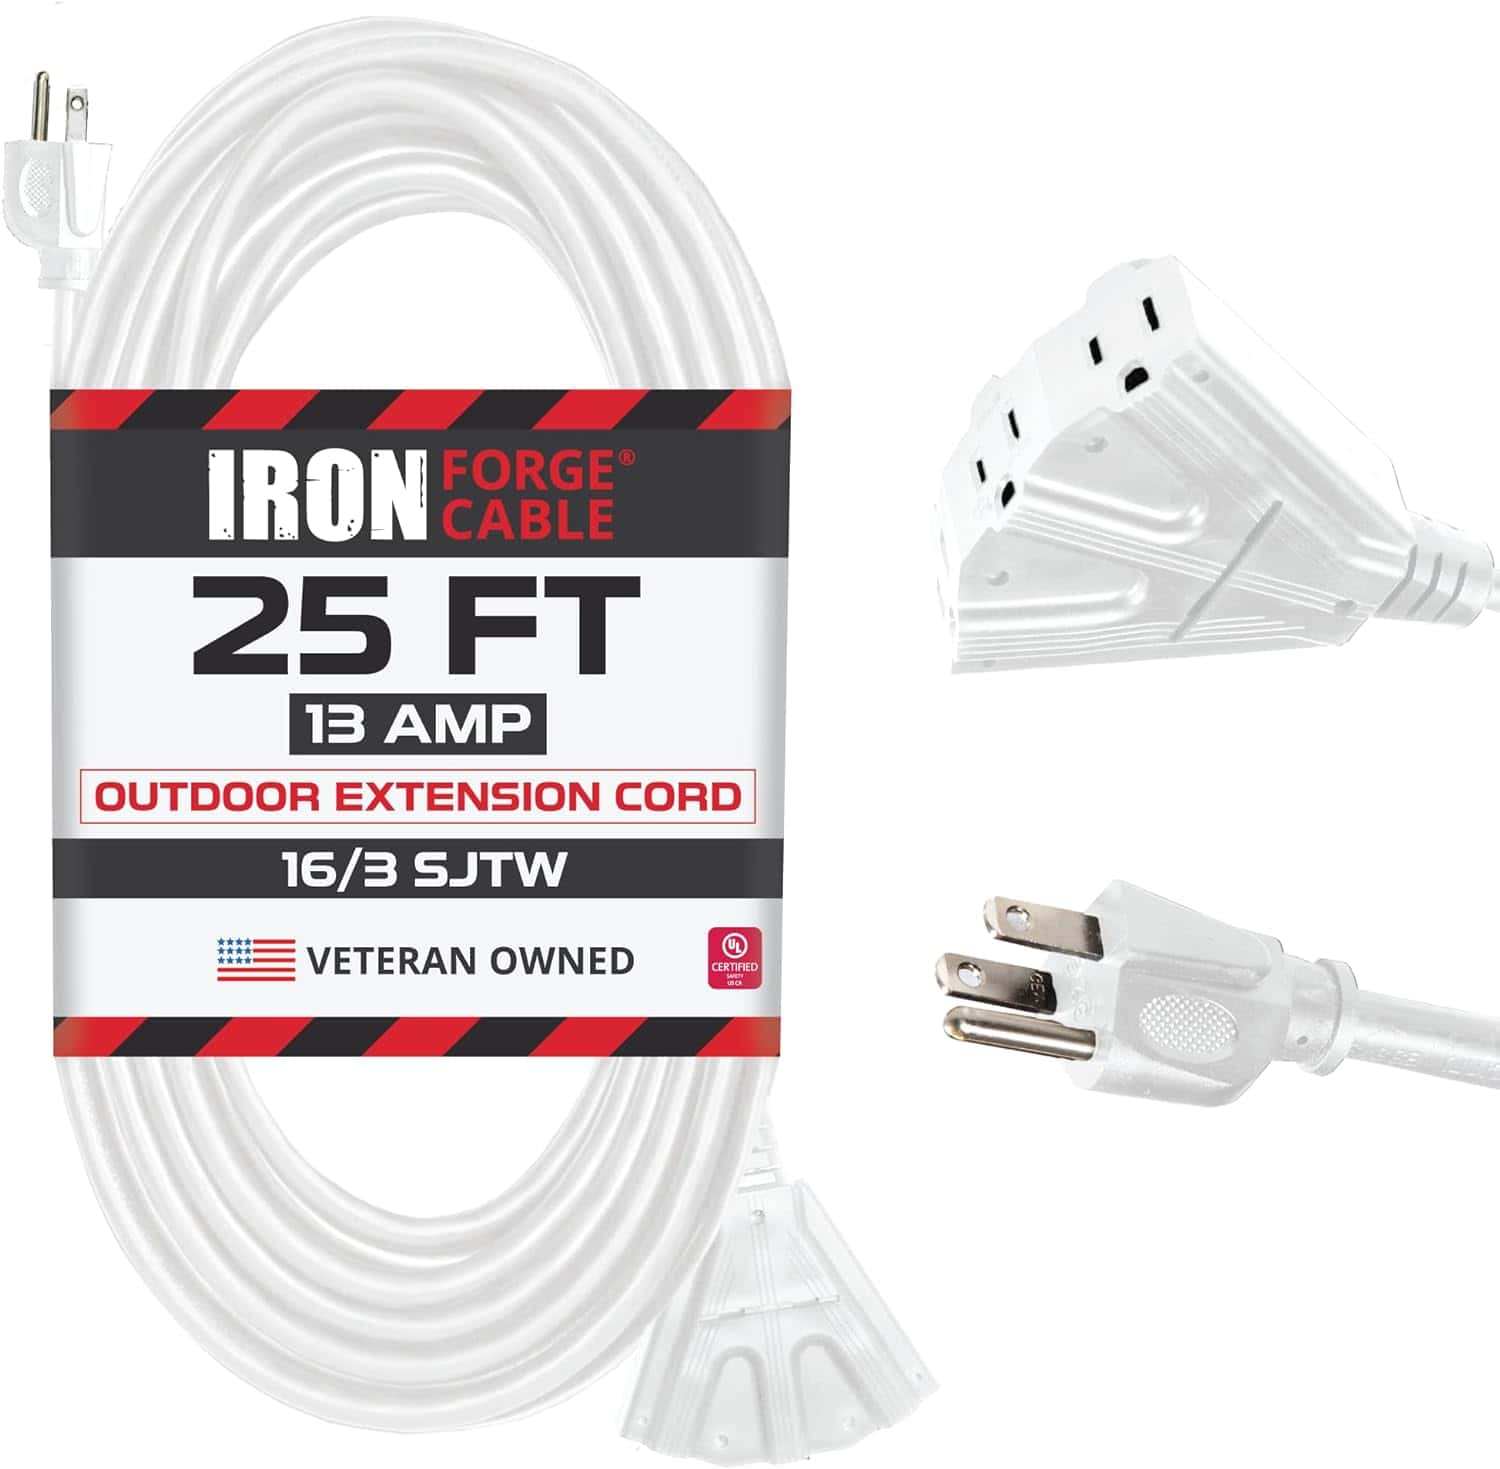 Iron-Forge-Cable-25-Ft-Extension-Cord-3-Outlets-3-Prong16-3-Weatherproof-White-Extension-Cord-with-Multiple-Outlets-25-Foot-13-Amp-SJTW-Outlet-Extender-Cord-for-Indoor-Outdoor-Lights-Decoration